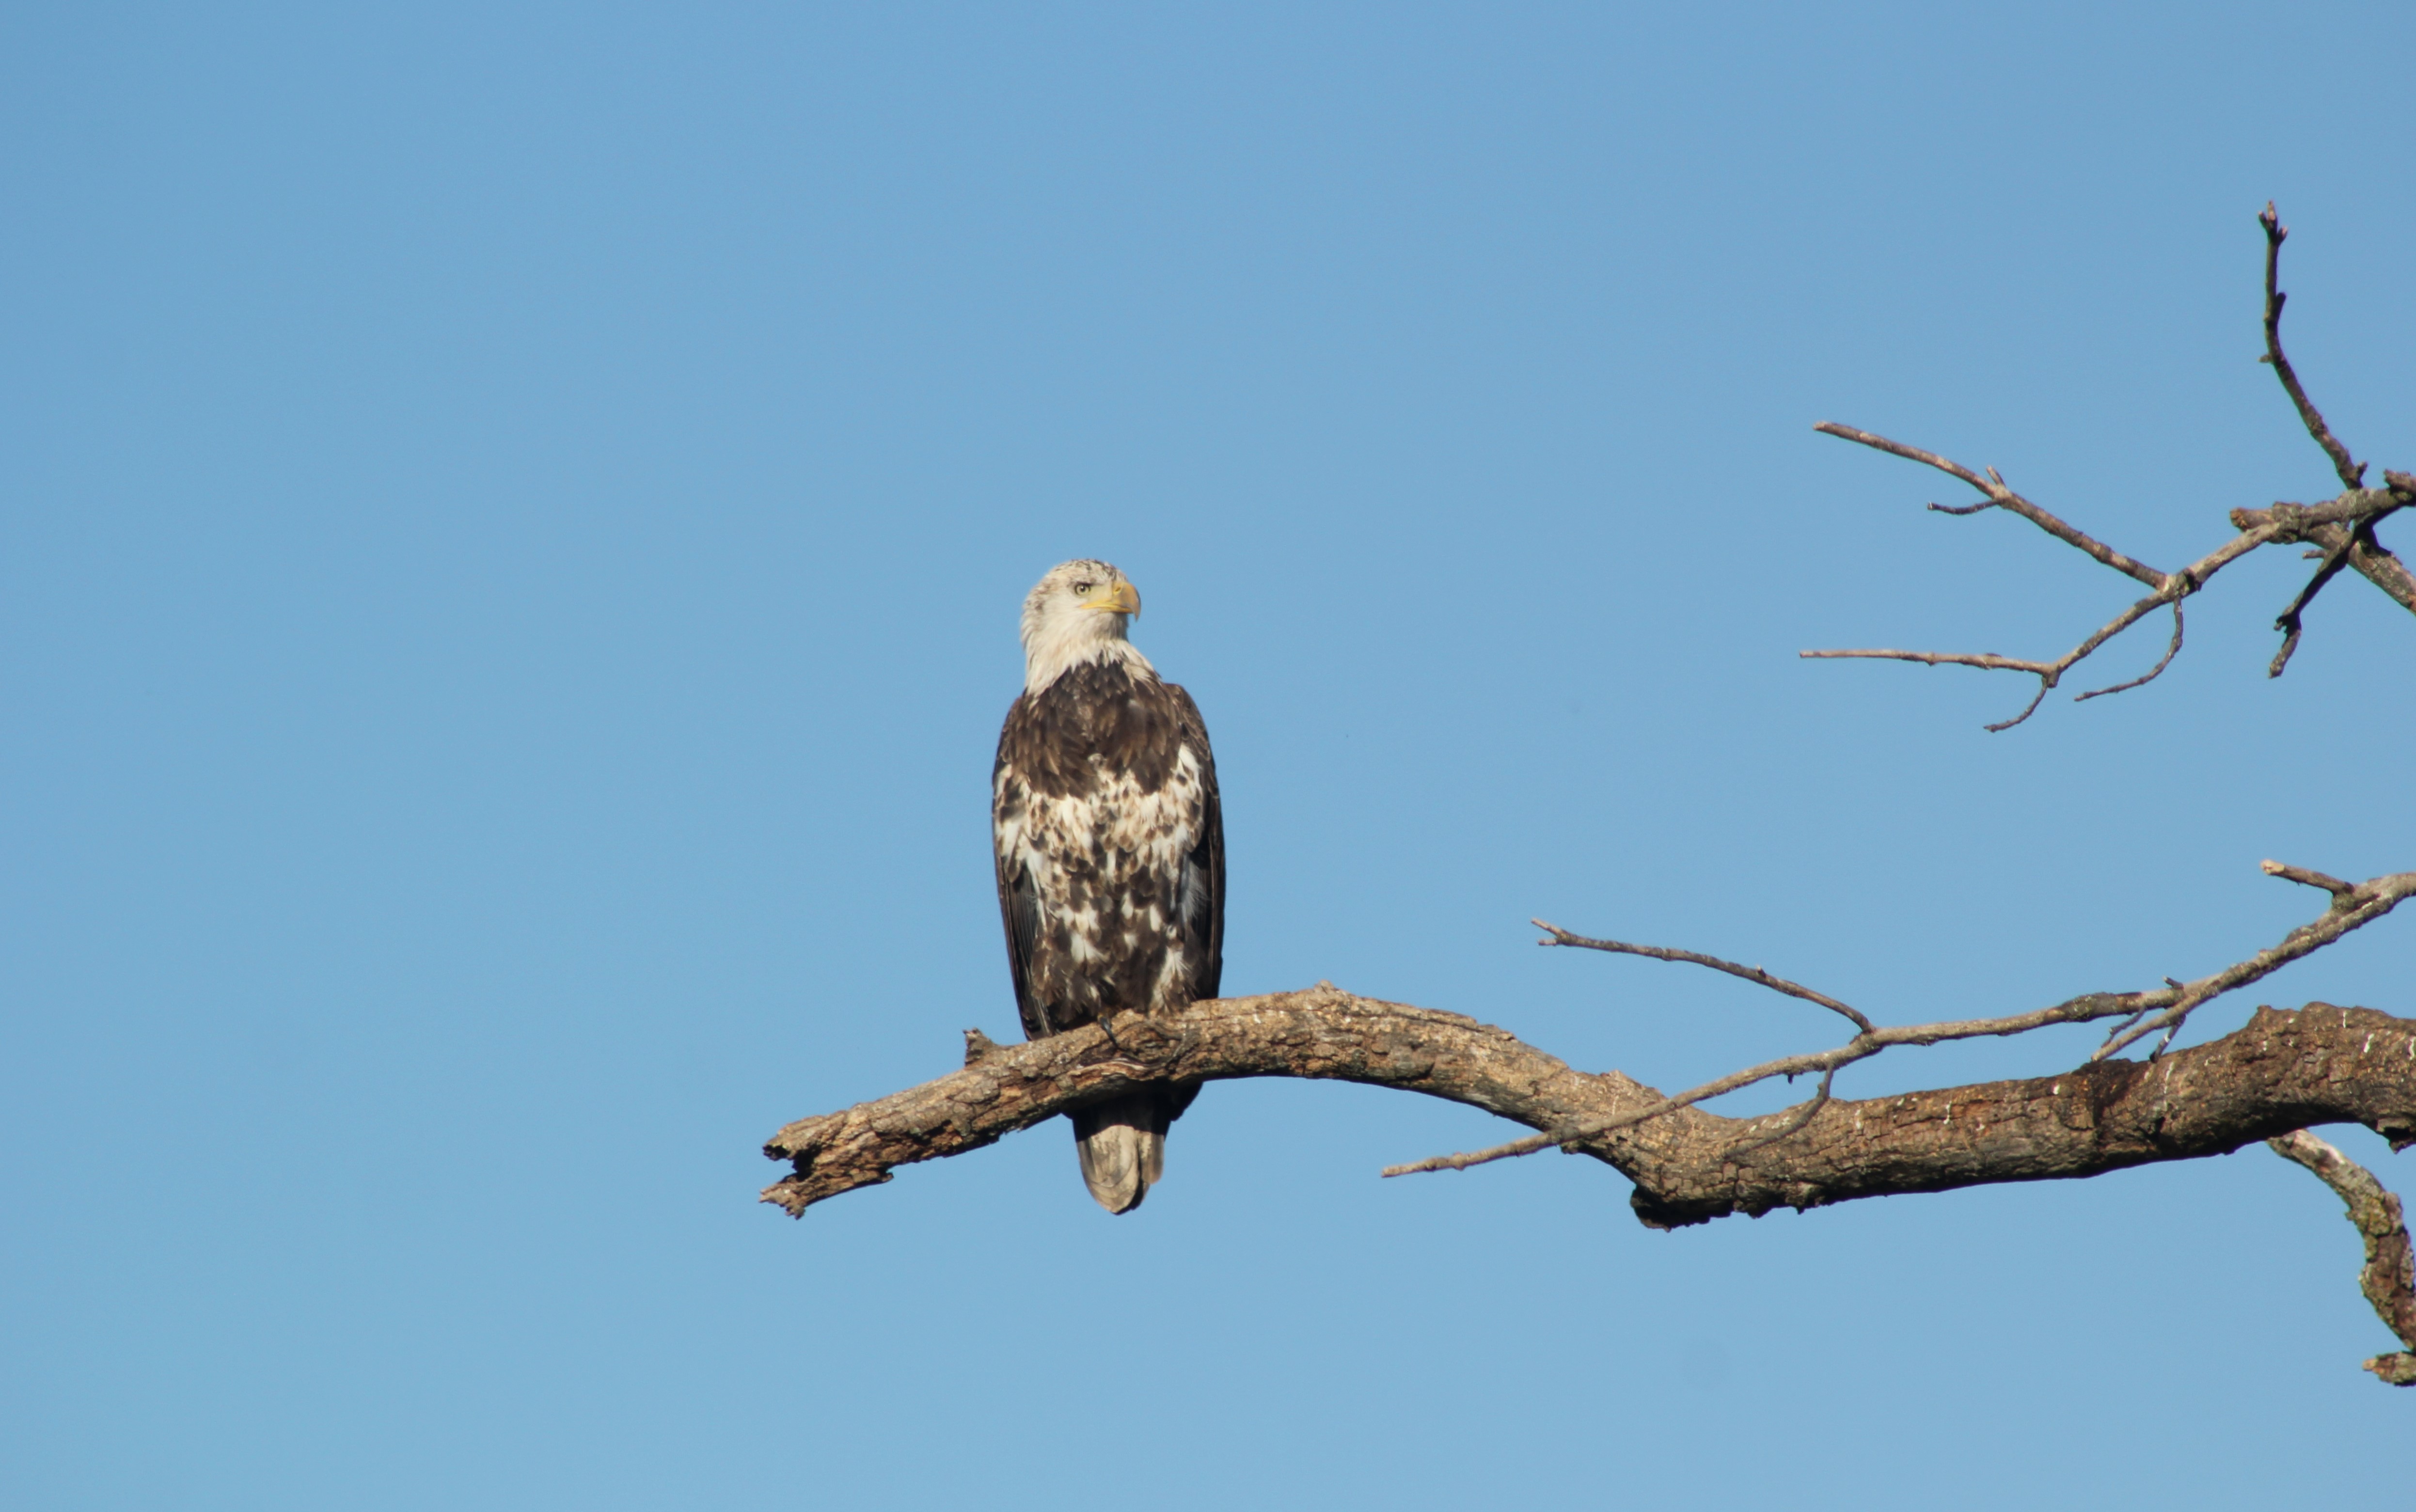 sub-adult bald eagle with mainly white head perched on dead branch against clear blue sky